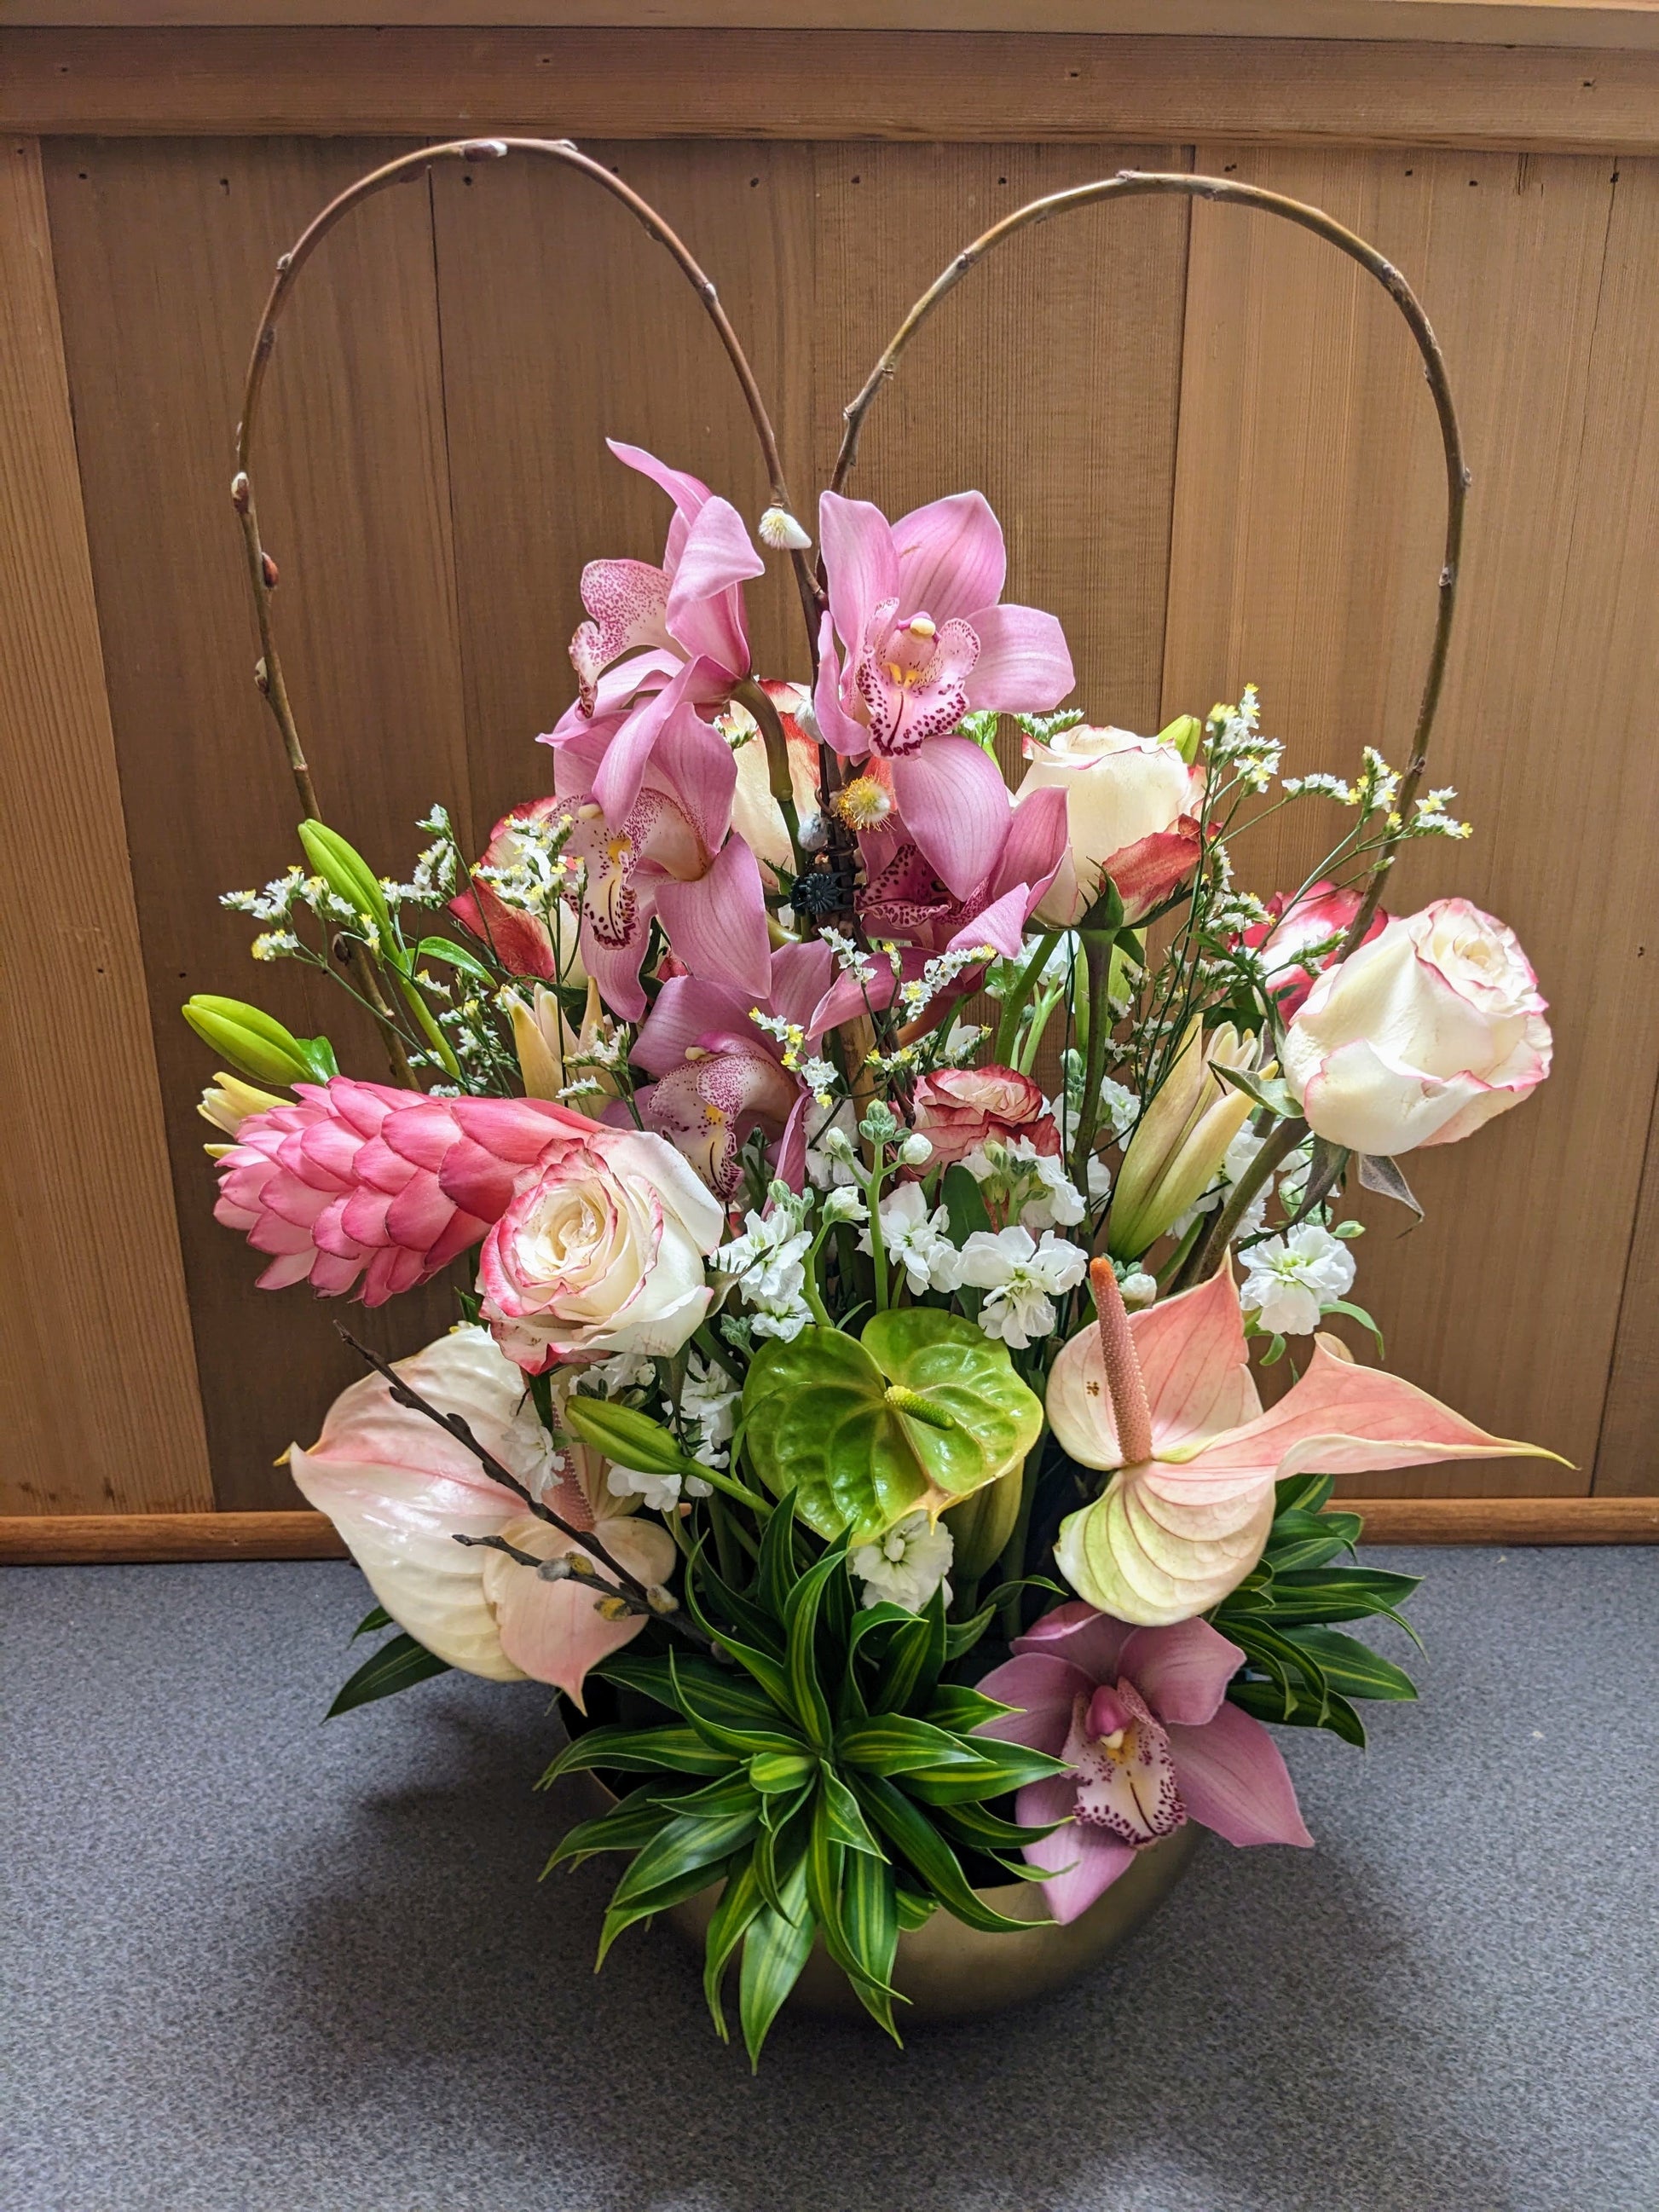 Sending You Aloha Flowers Flower Arrangements - Local Delivery